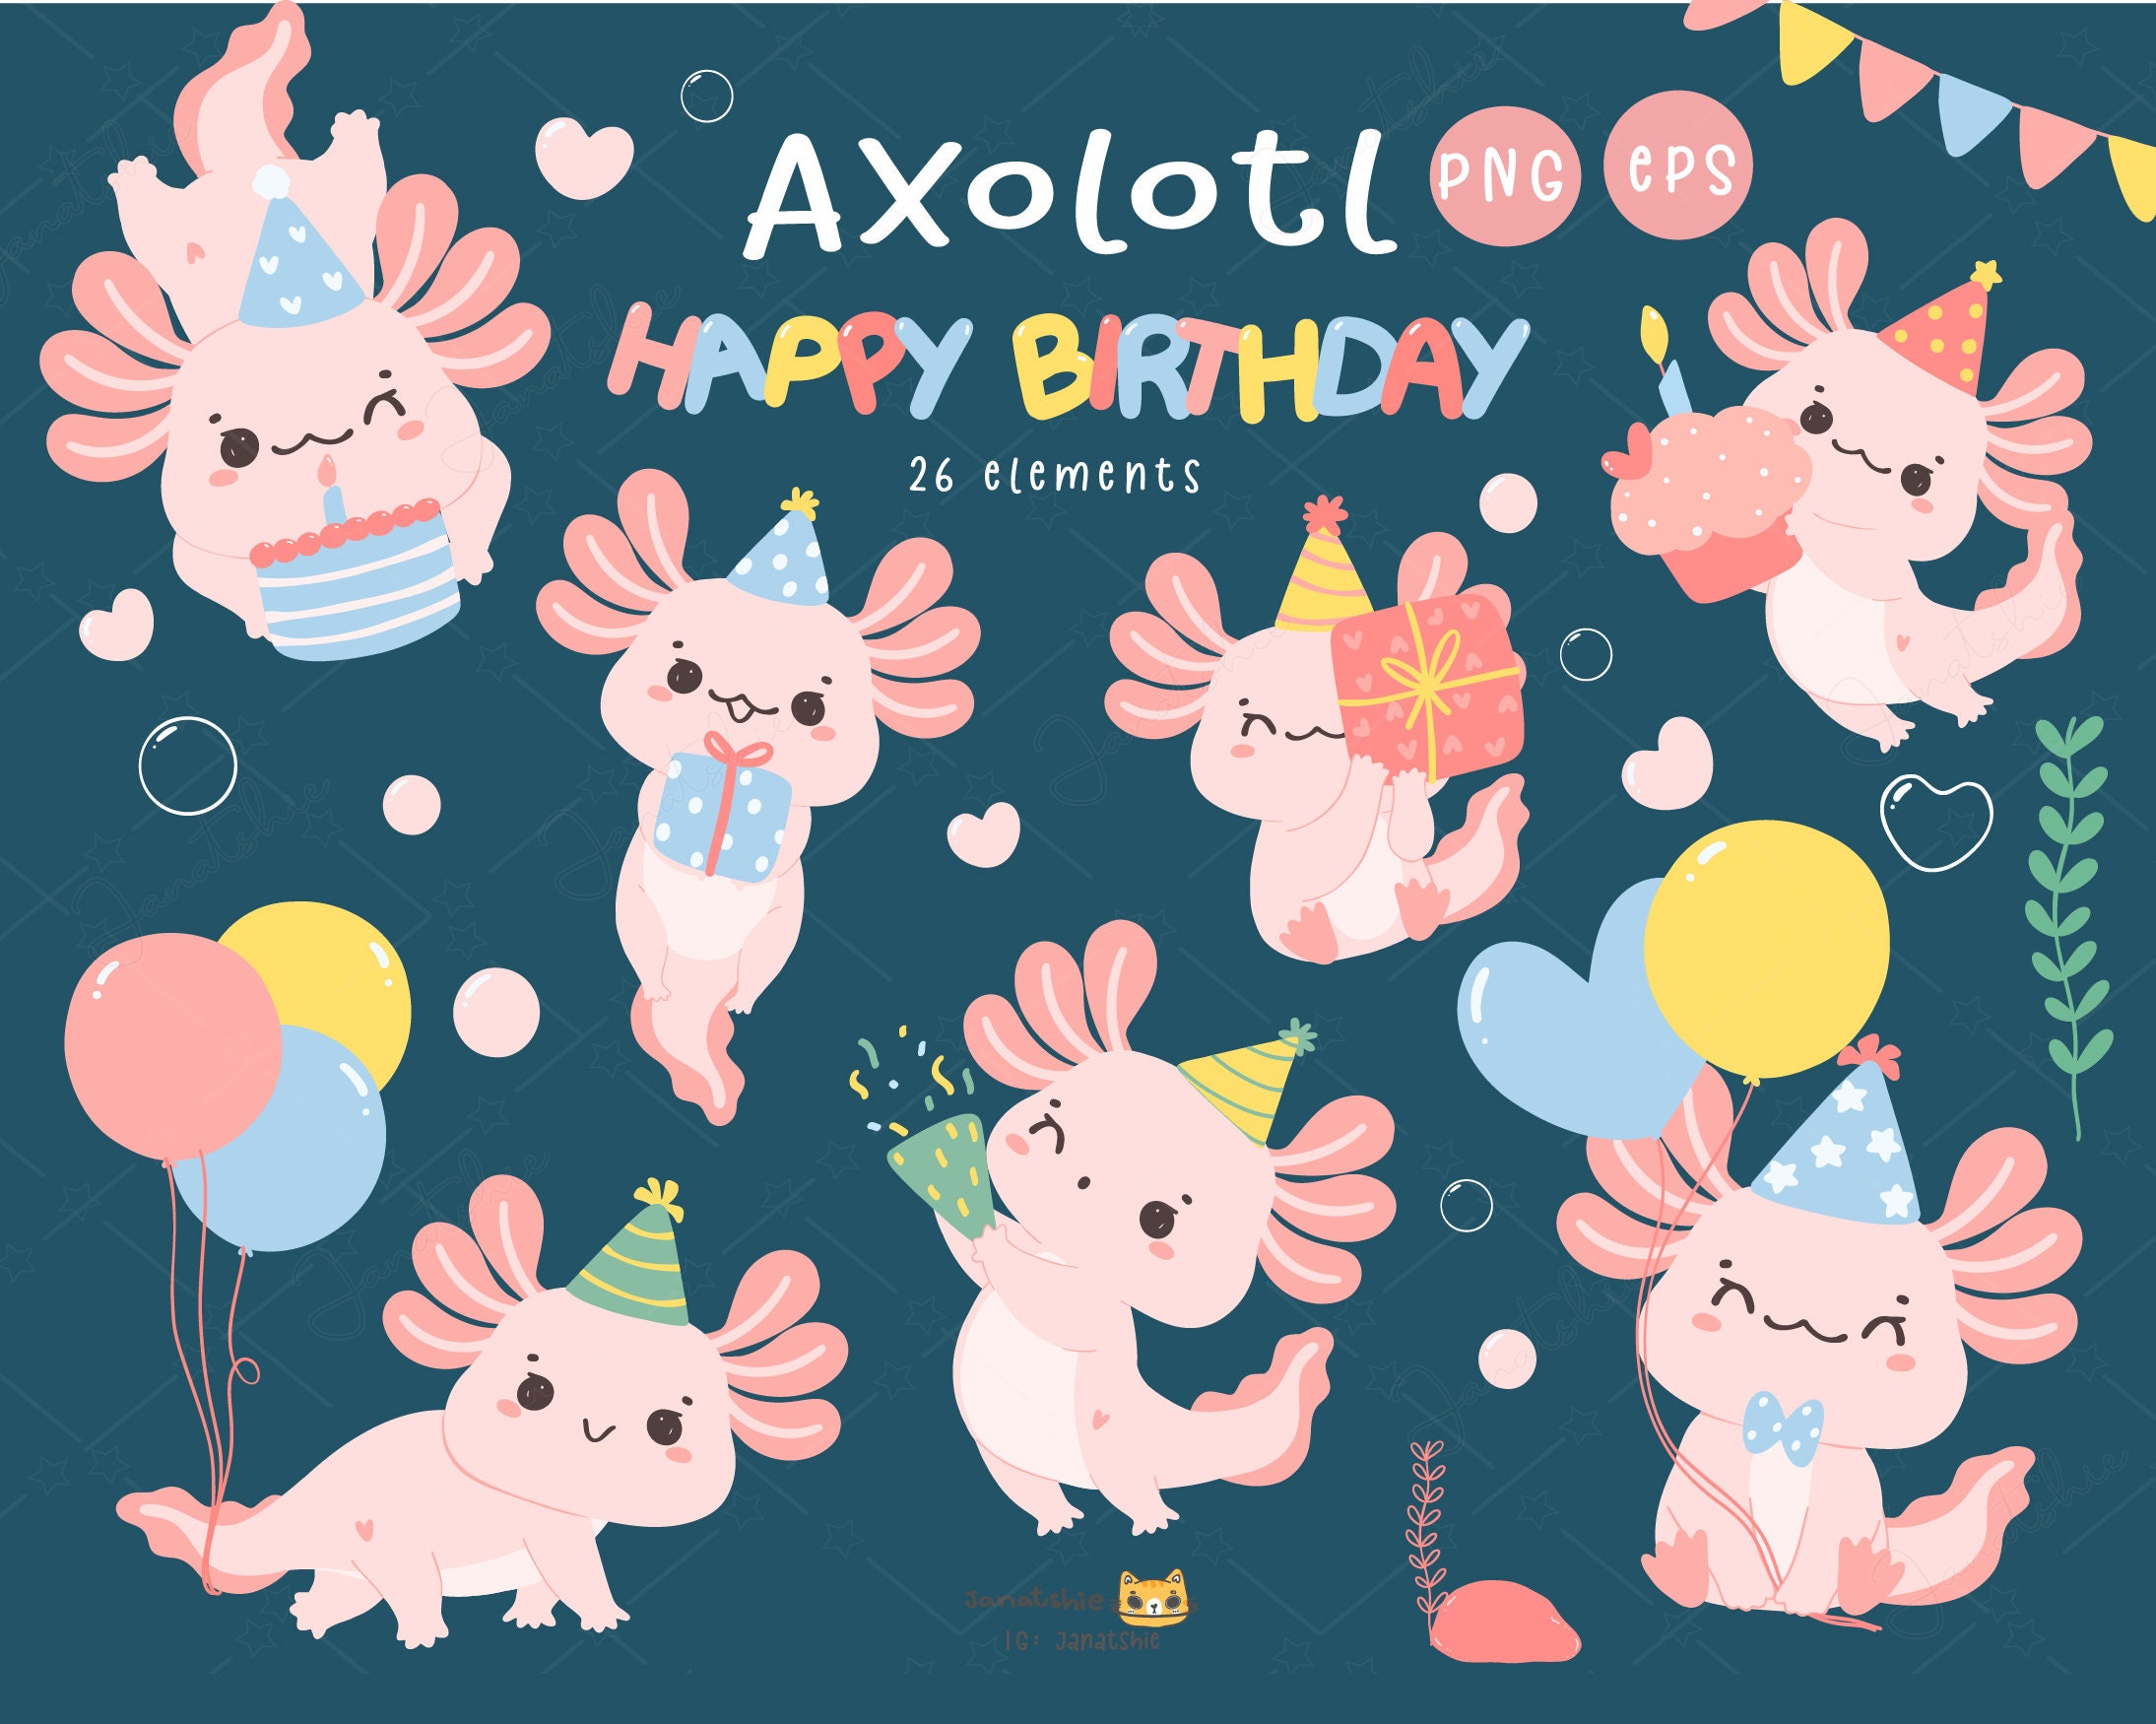  Axolotl Pinata Birthday Party Supplies Animals Pinata with a  Blindfold, Bat and Confetti for Axolotl Party Favors for Kids Girls  Birthday Baby Shower Party Supplies, 15.75 x 12.2 x 2.95 Inch 